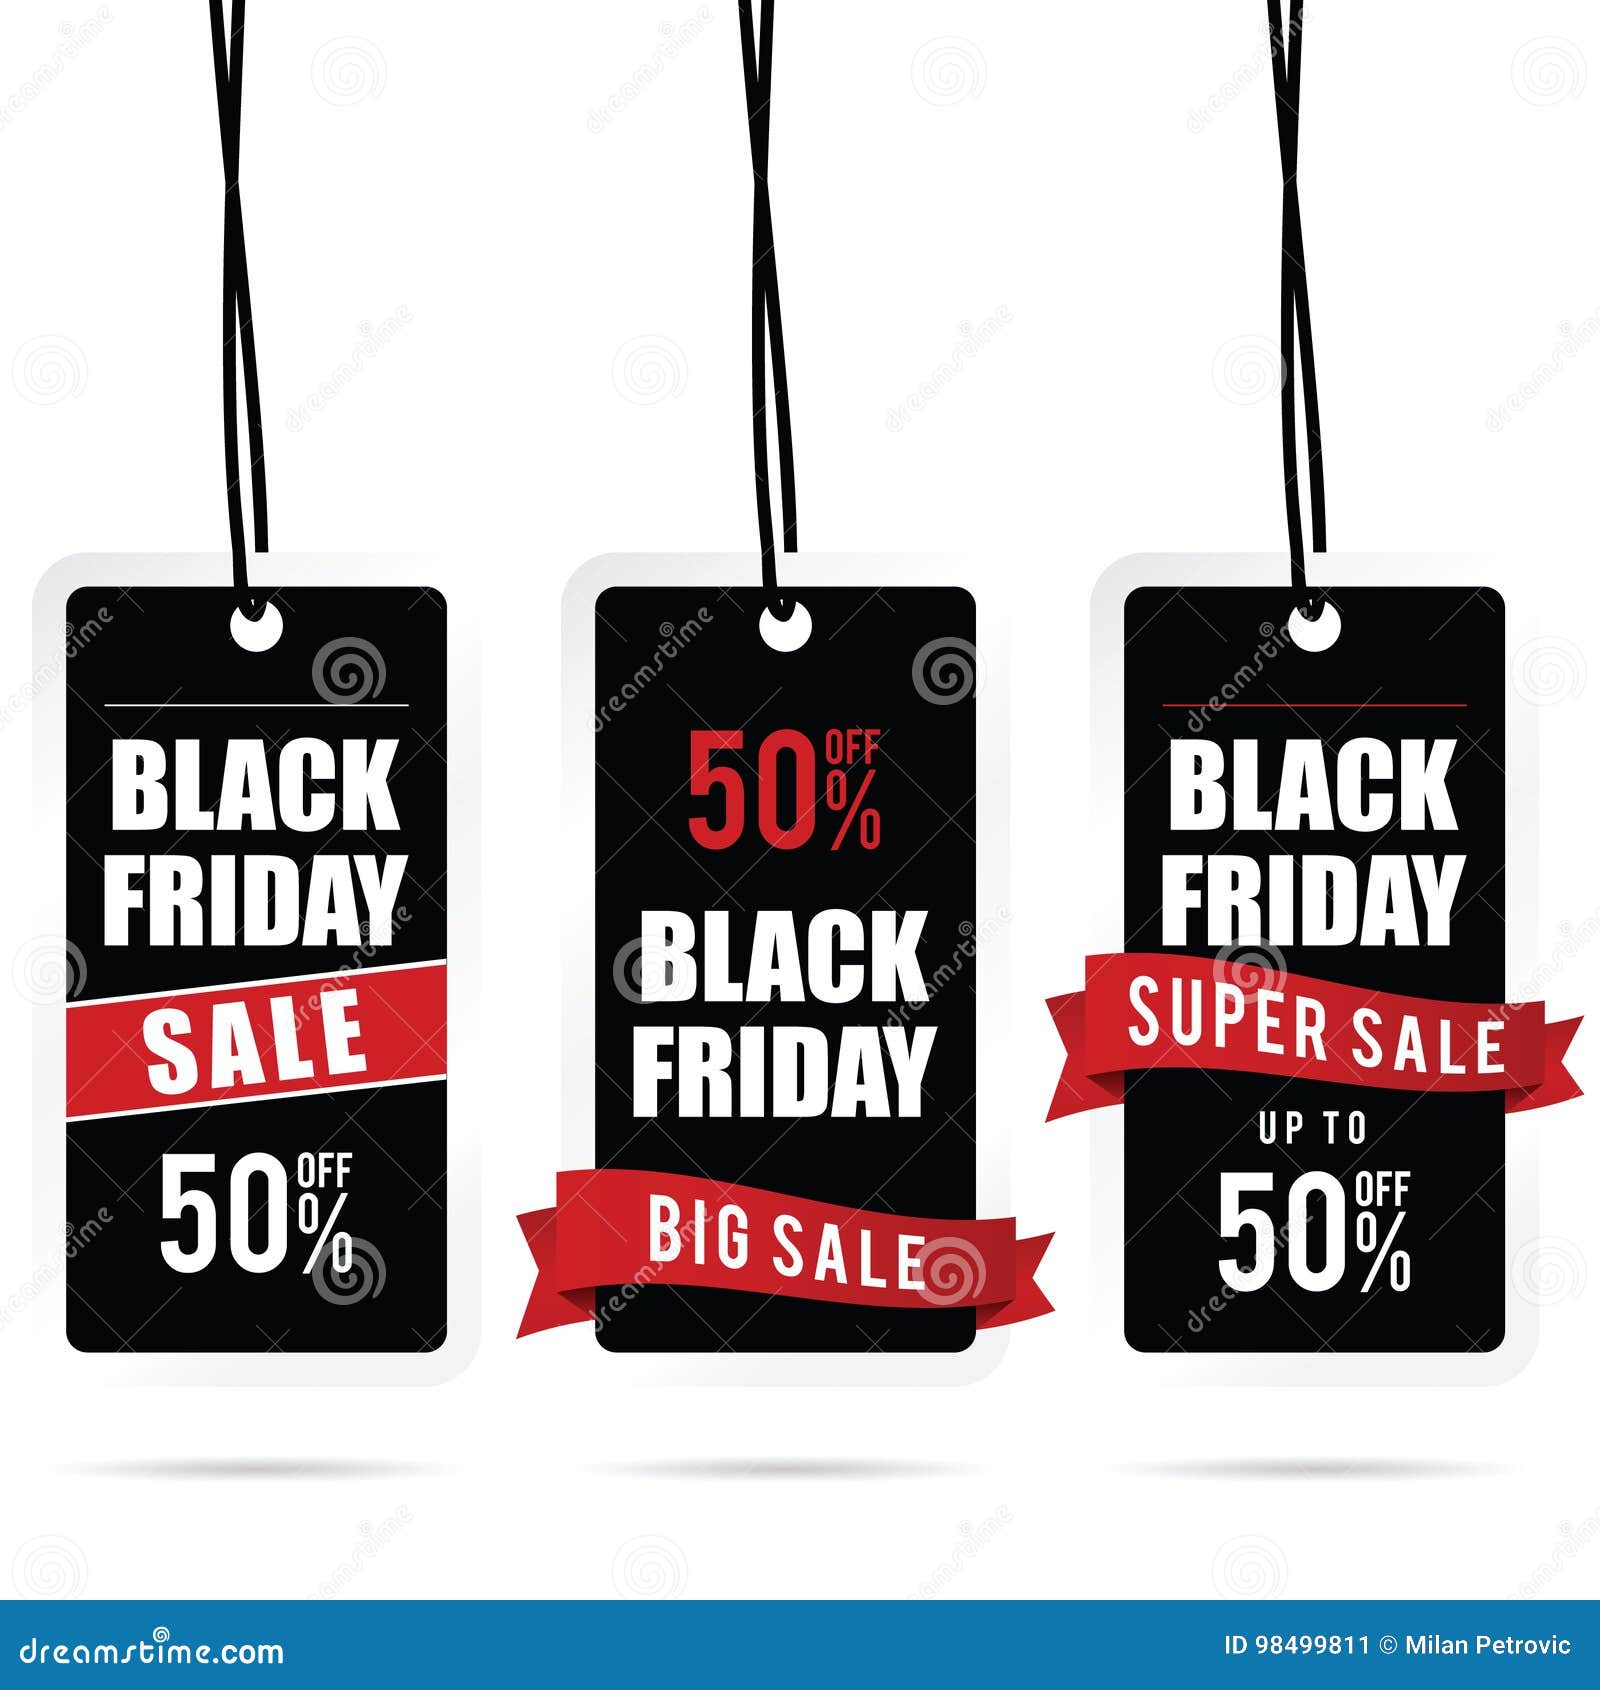 Black Friday Big Sale Tag Set In Color Illustration Stock Vector - Why Is Black Friday A Big Deal